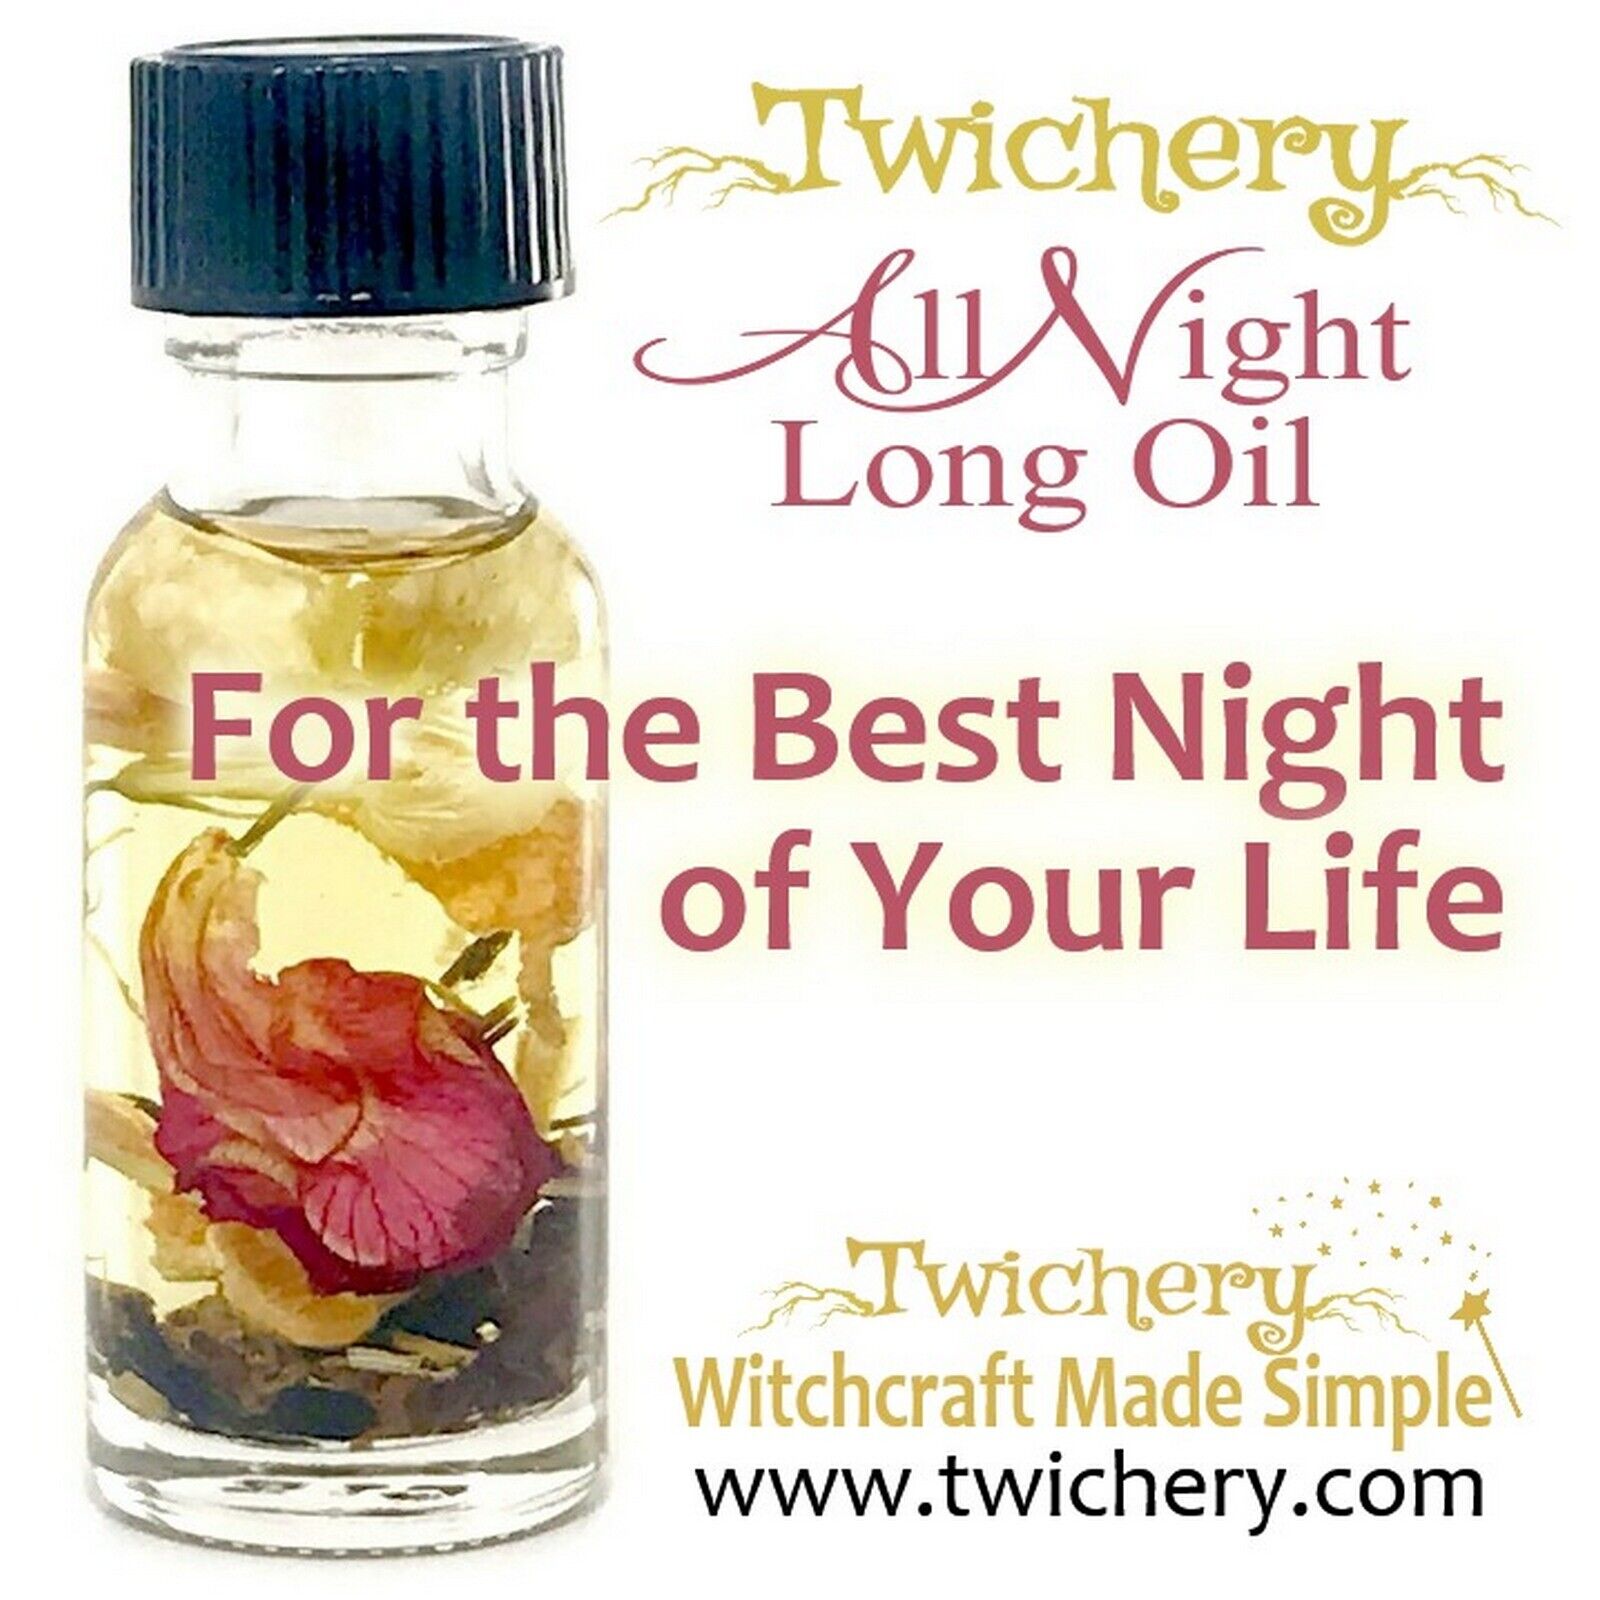 ALL NIGHT LONG OIL, Sexual Stamina, Lust Seduction Passion Hoodoo from TWICHERY